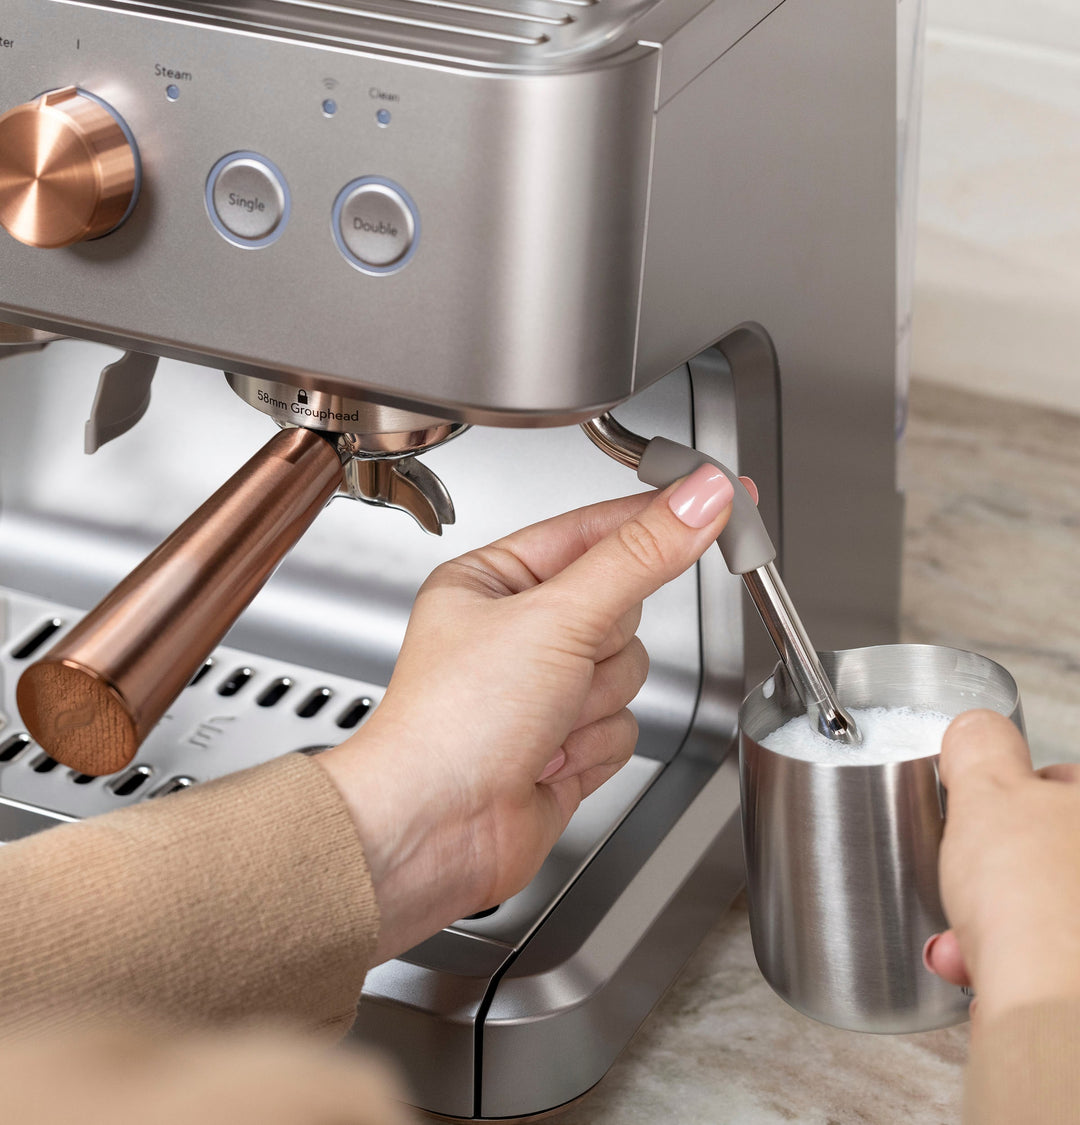 Café - Bellissimo Semi-Automatic Espresso Machine with 15 bars of pressure, Milk Frother, and Built-In Wi-Fi - Steel Silver_20